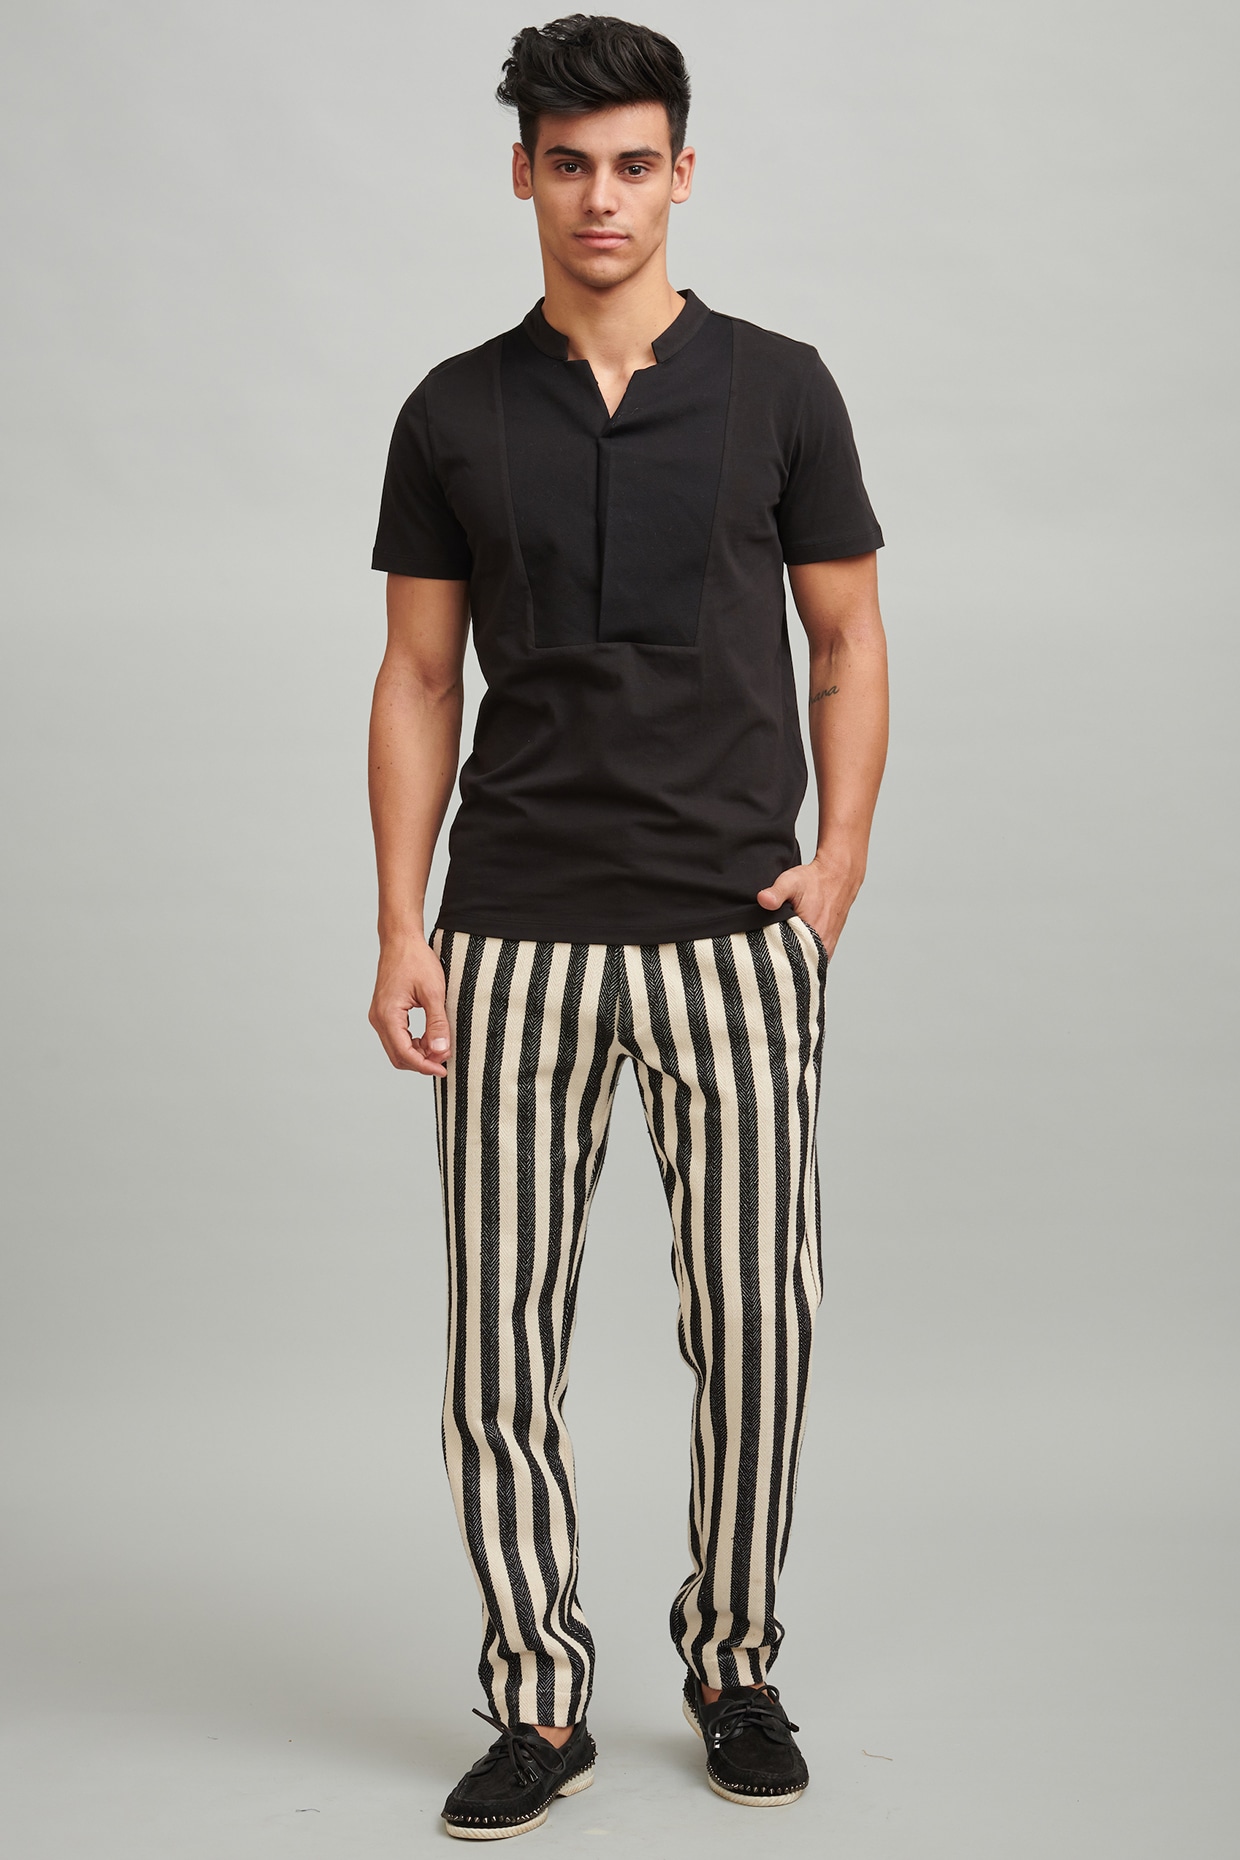 Buy FRATINI Mens 5 Pocket Stripe Formal Trousers with Chain  Shoppers Stop